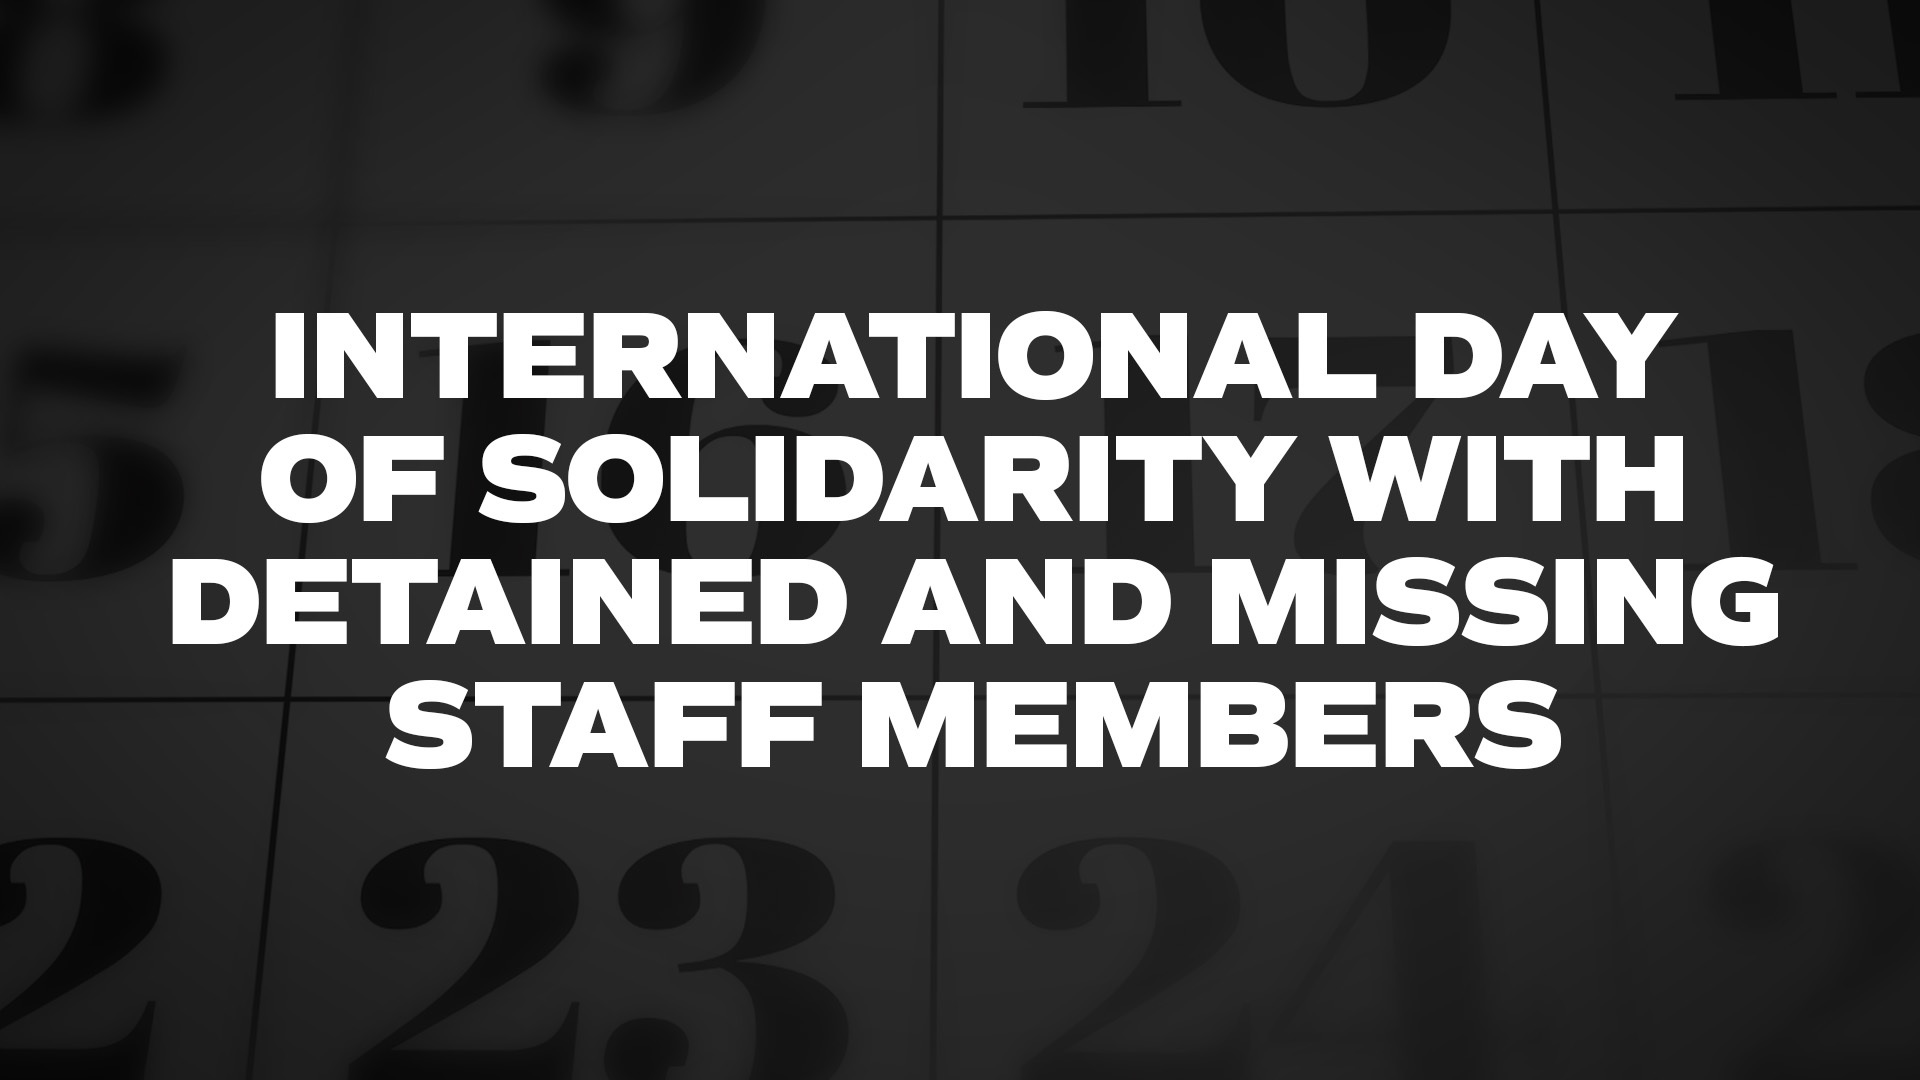 INTERNATIONAL DAY OF SOLIDARITY WITH DETAINED AND MISSING STAFF MEMBERS 3